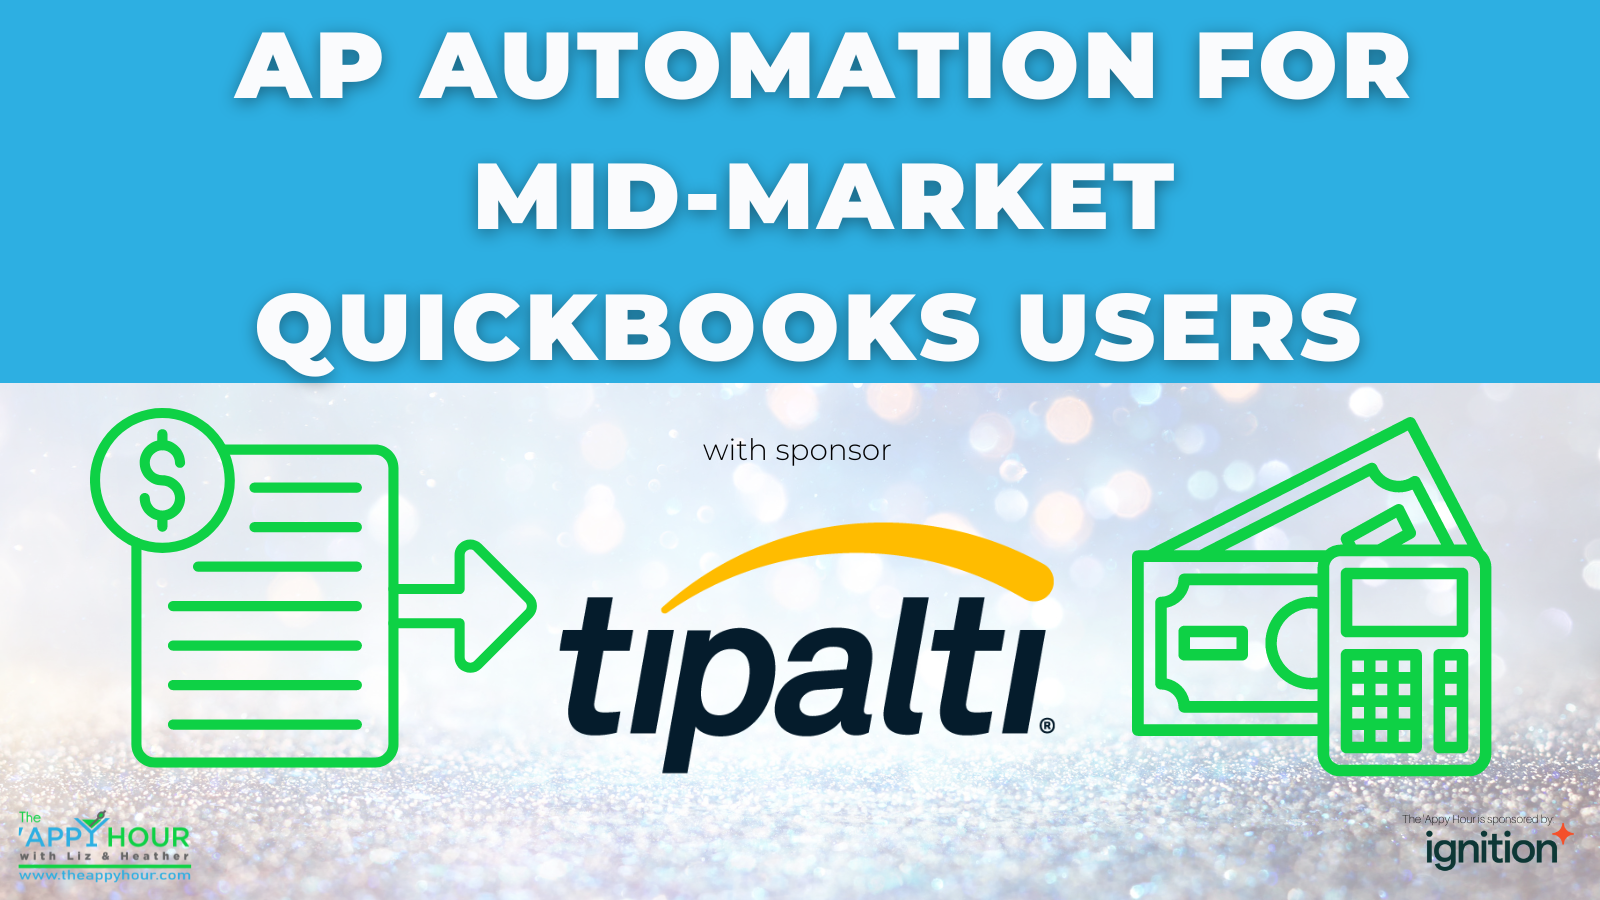 AP Automation for Mid-Market Quickbooks Users